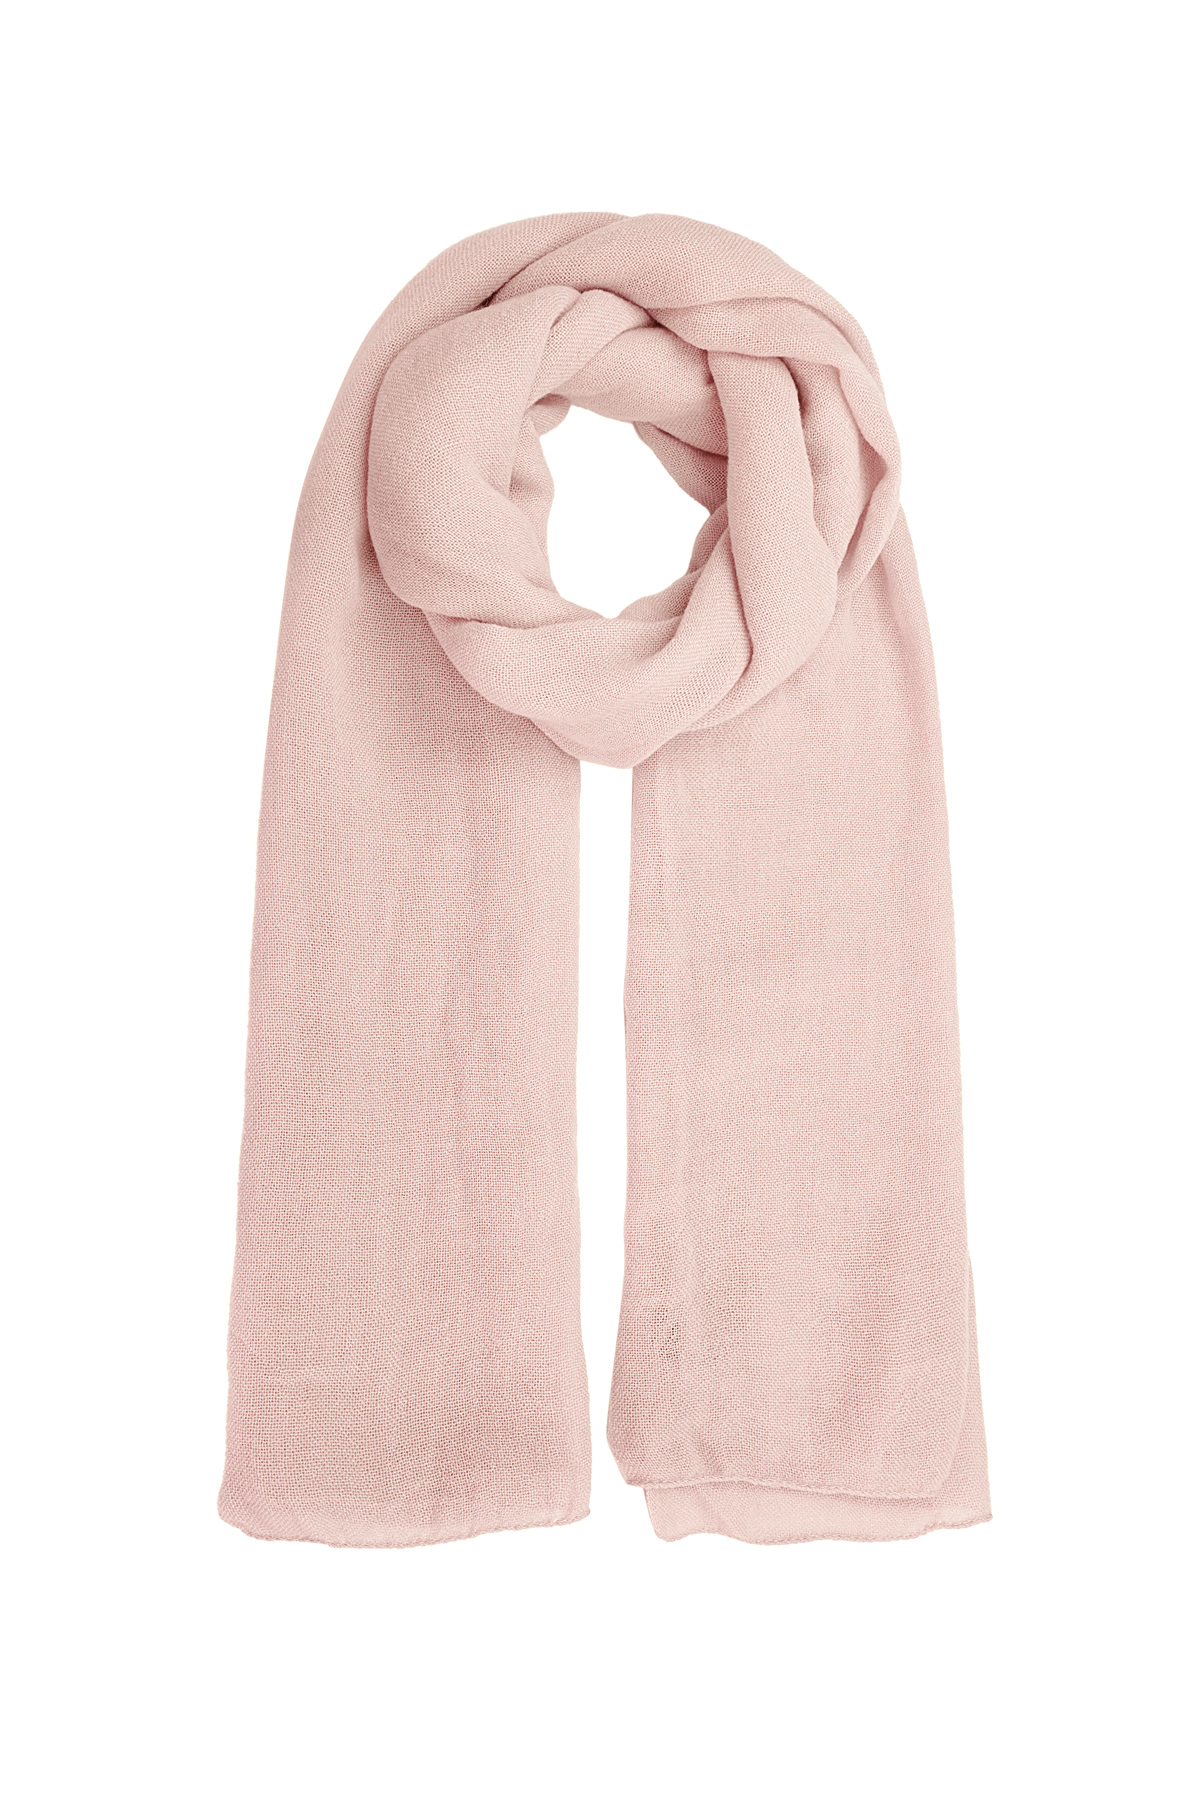 Scarf solid color - pastel pink